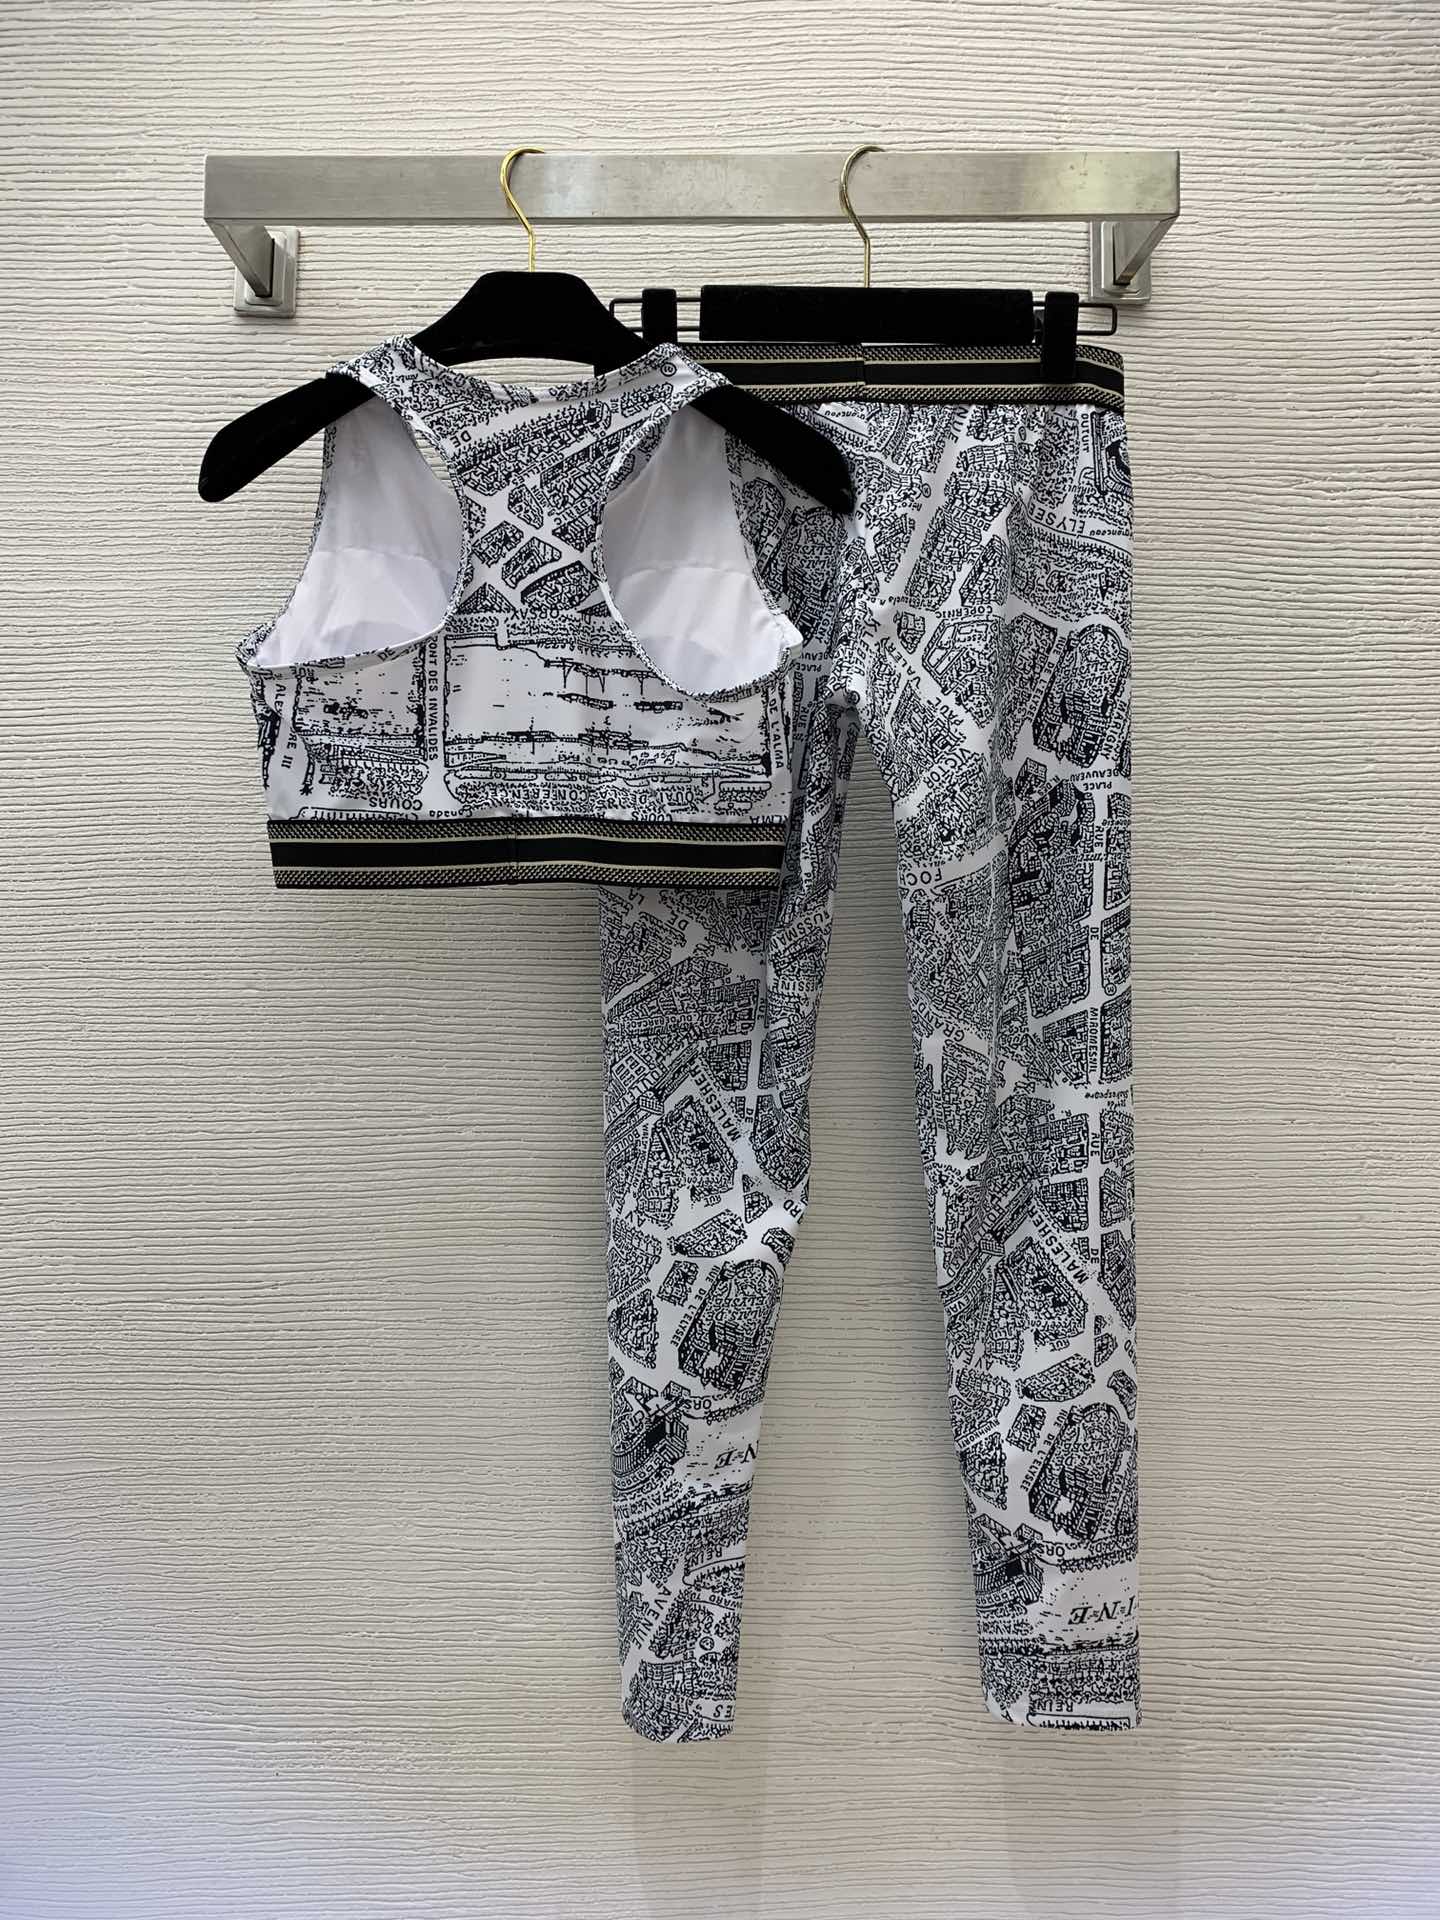 Fake
 Dior Clothing Tank Top Two Piece Outfits & Matching Sets Yoga Clothes UK Sale
 Black Blue White Printing Spring/Summer Collection Sweatpants